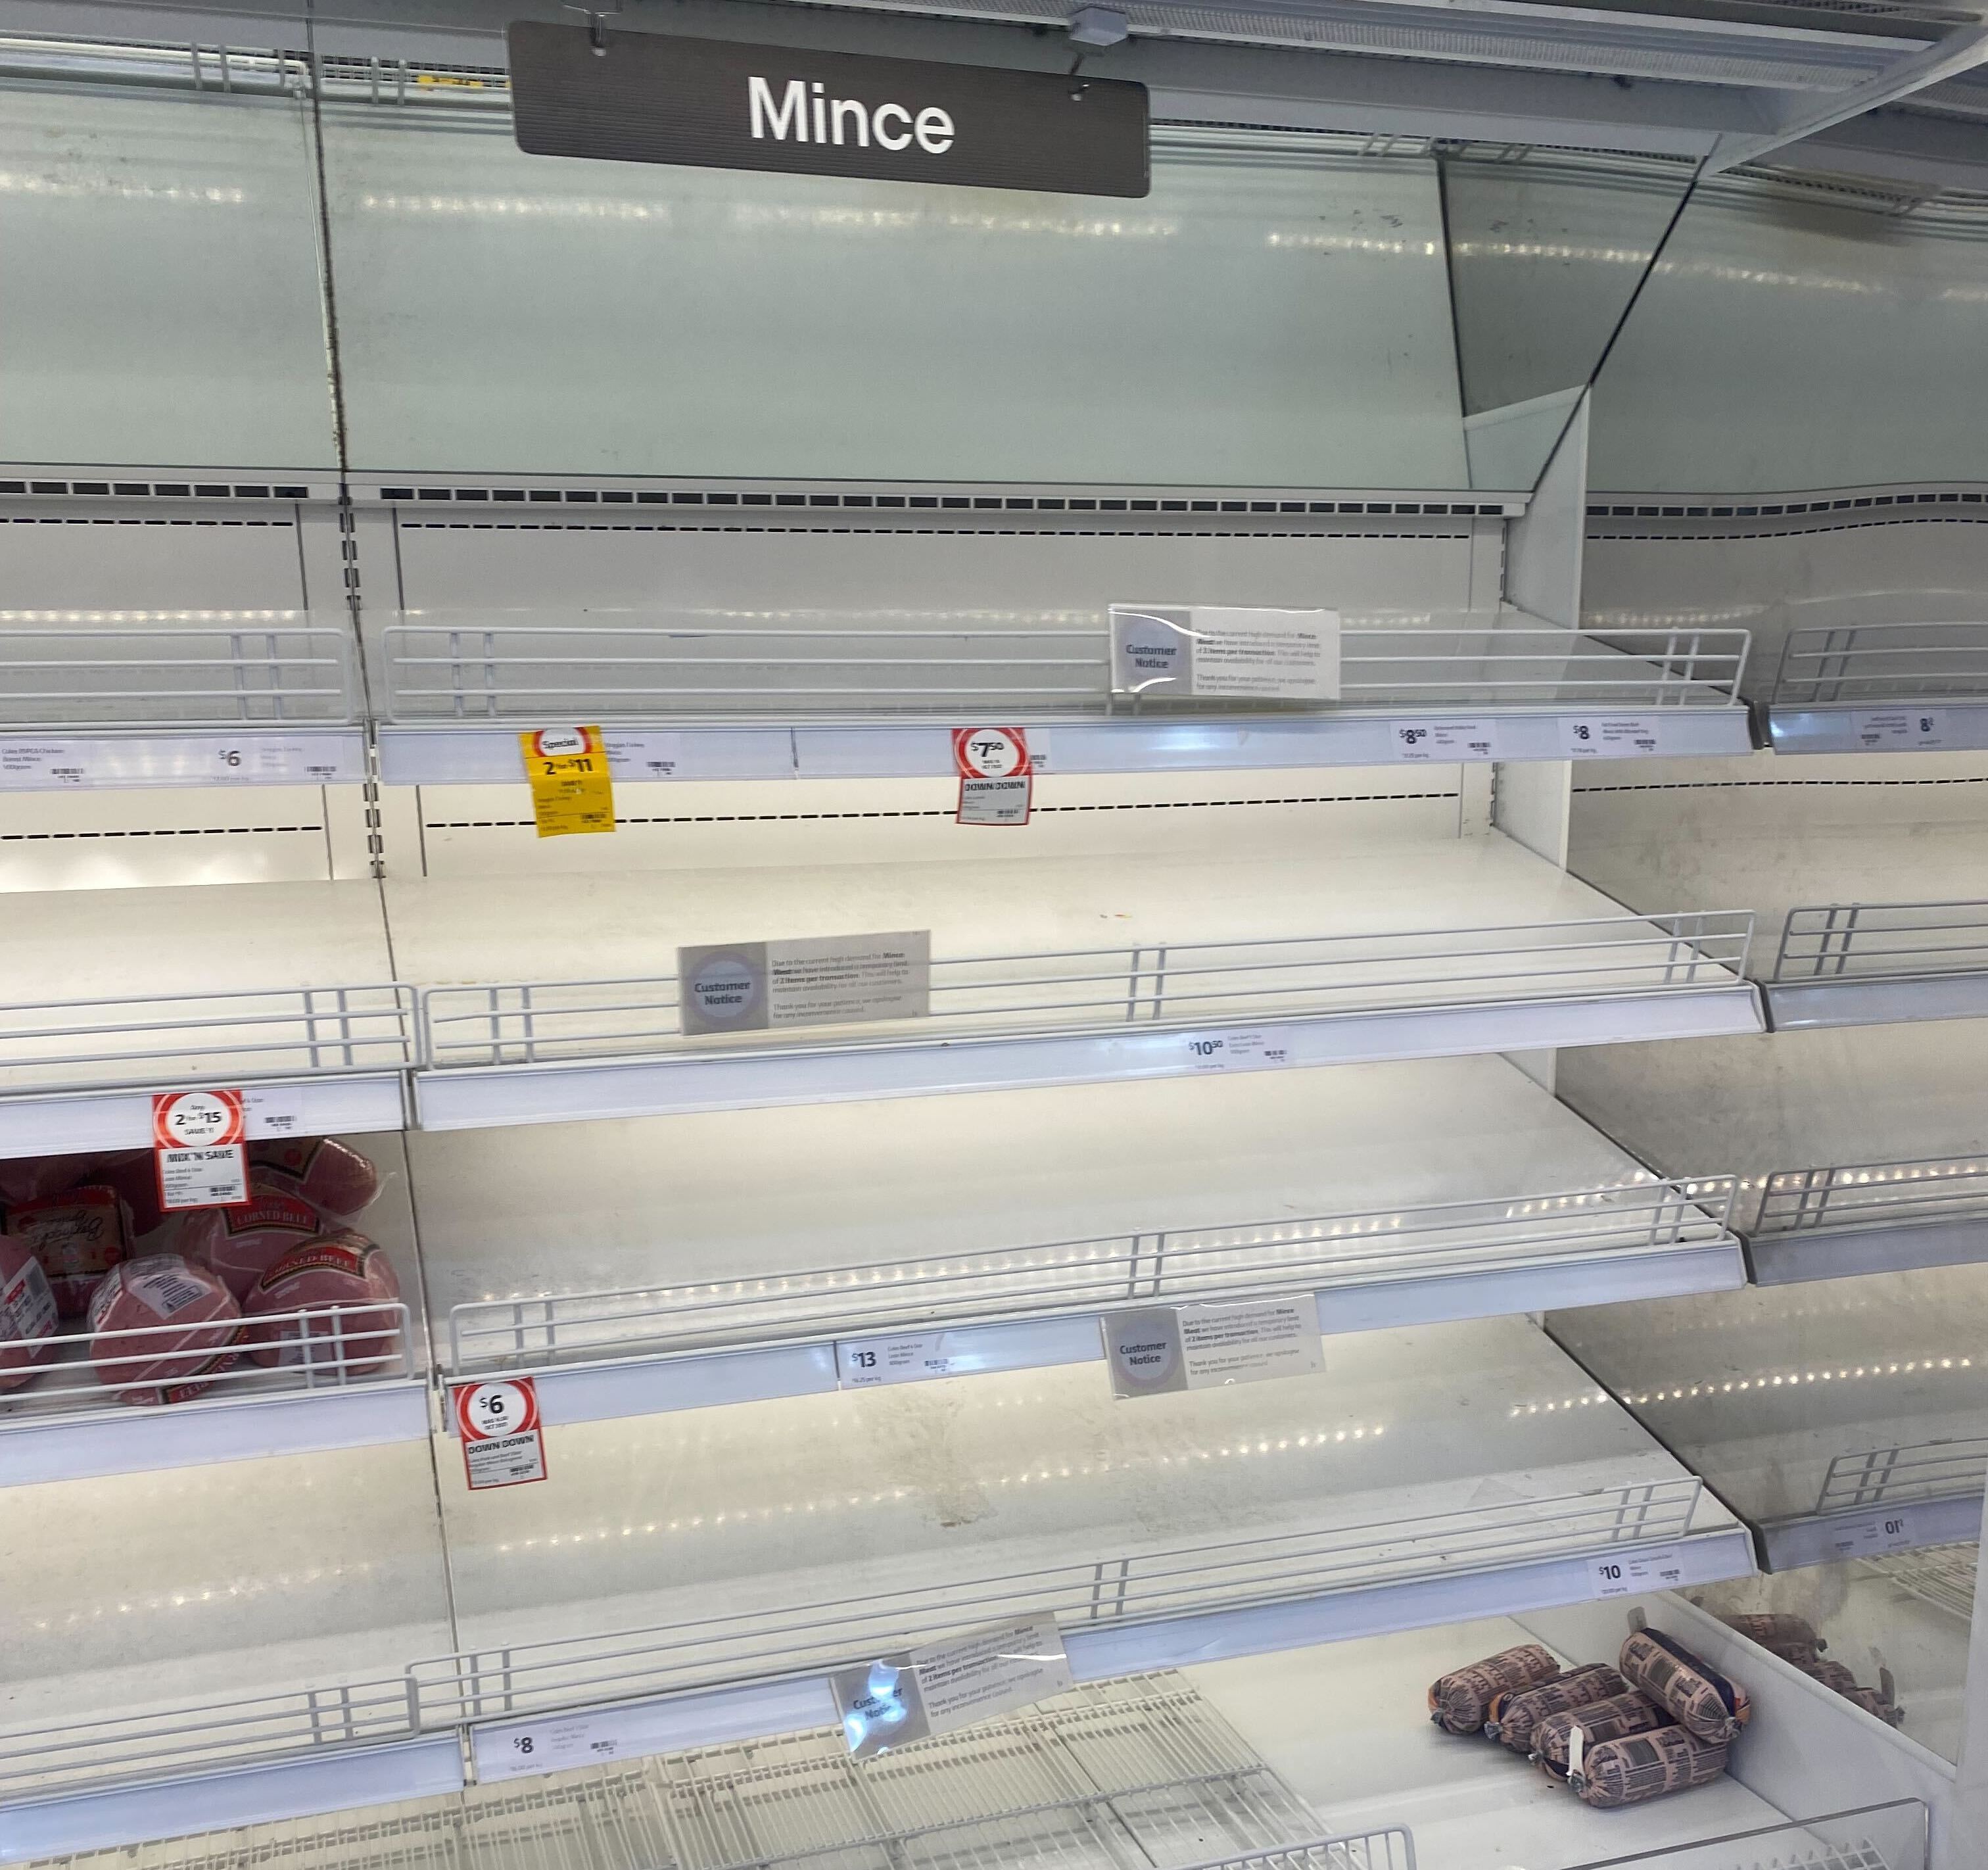 Consumers warned to prepare for more empty shelves as extreme weather events increase